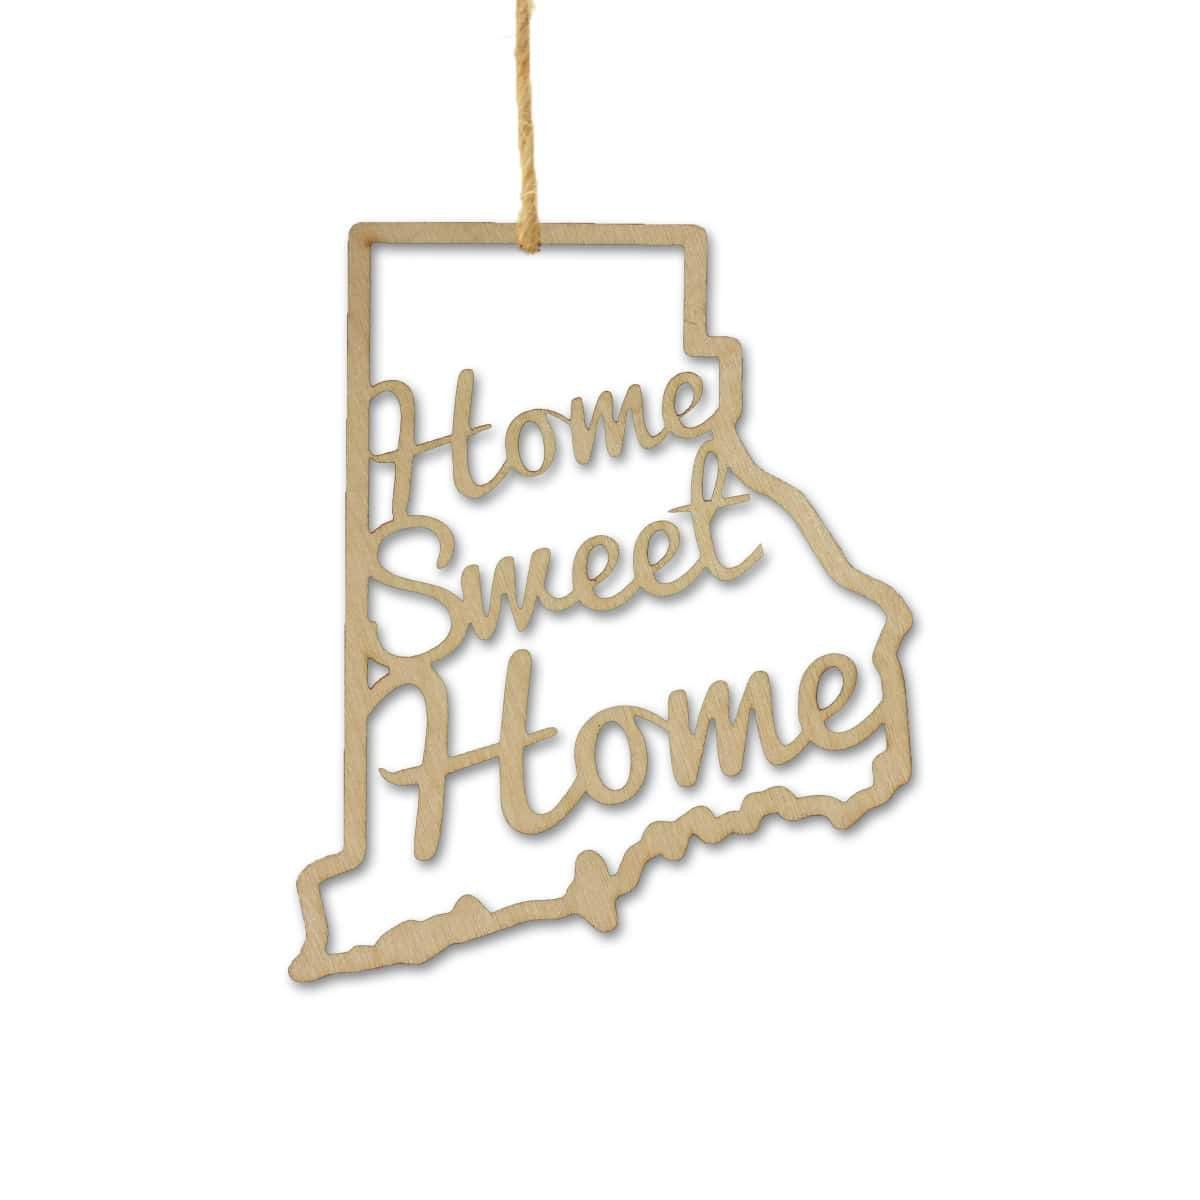 Torched Products Ornaments Rhode Island Home Sweet Home Ornaments (781221593205)